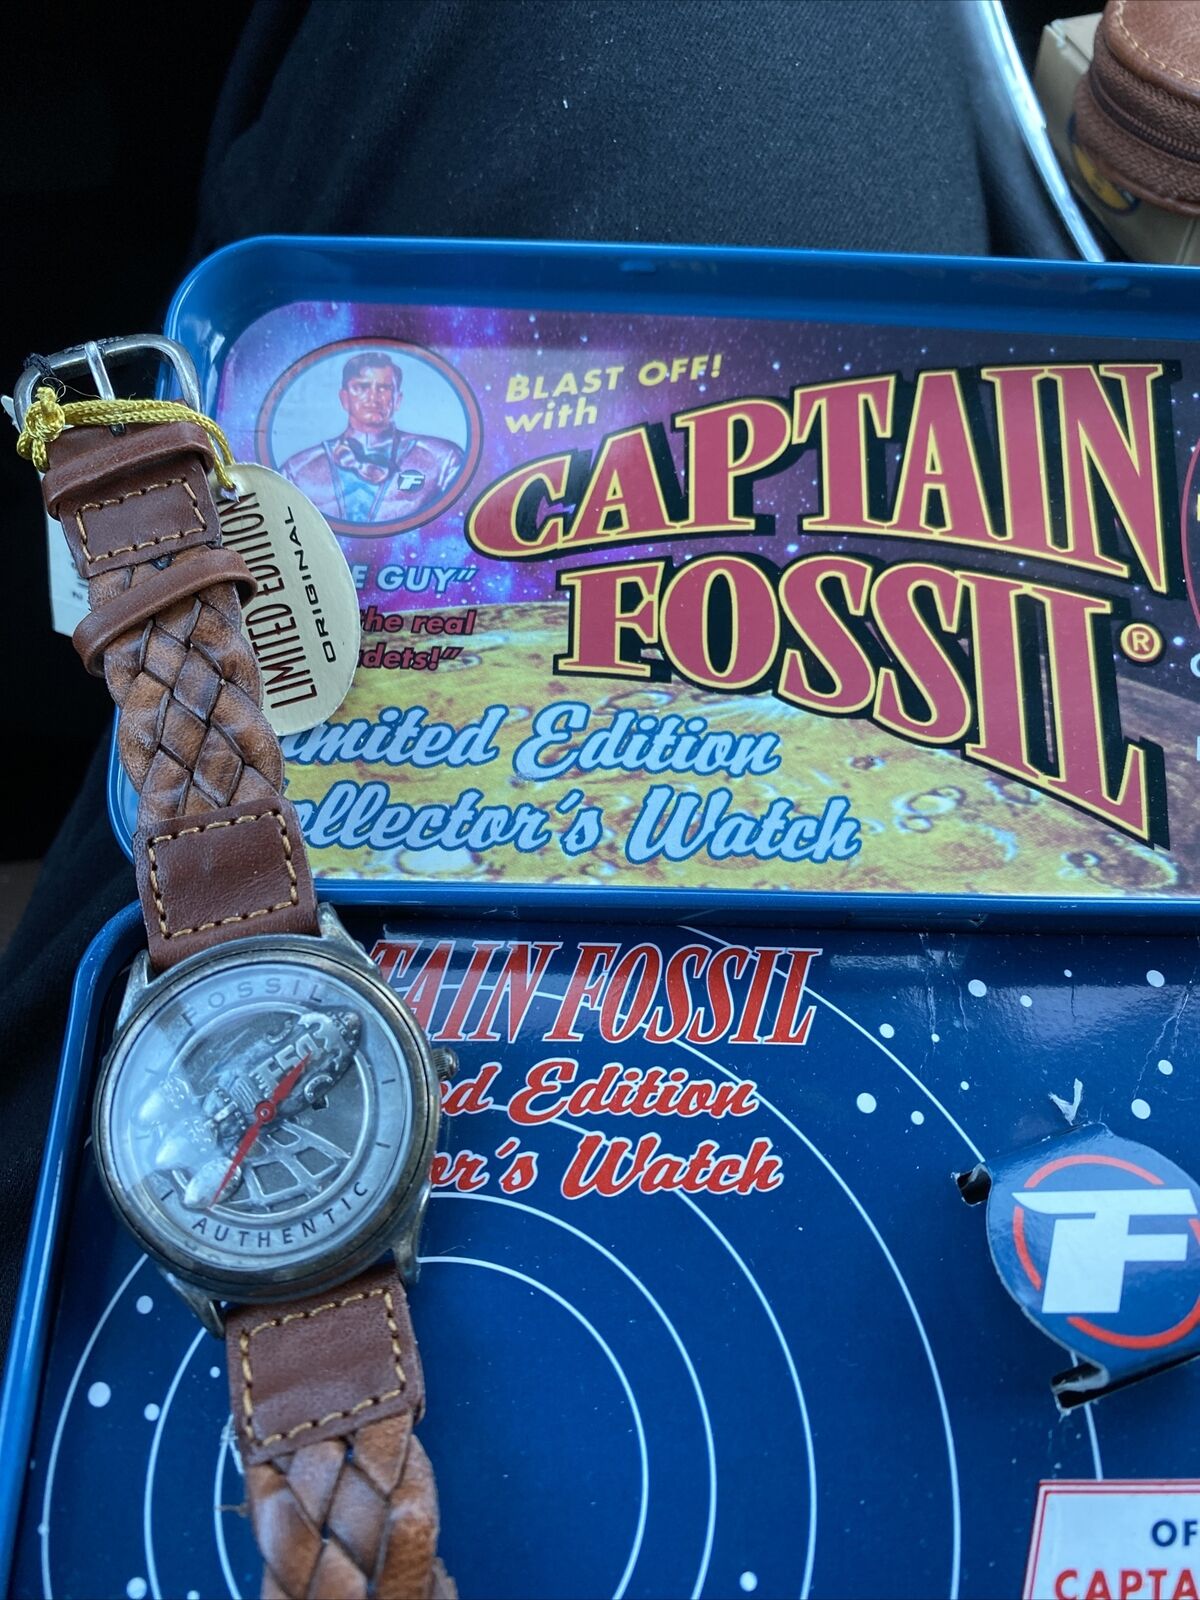 Fossil Limited edition CAPTAIN FOSSIL Rocket Watch Mint Cond Never Worn LE-9432